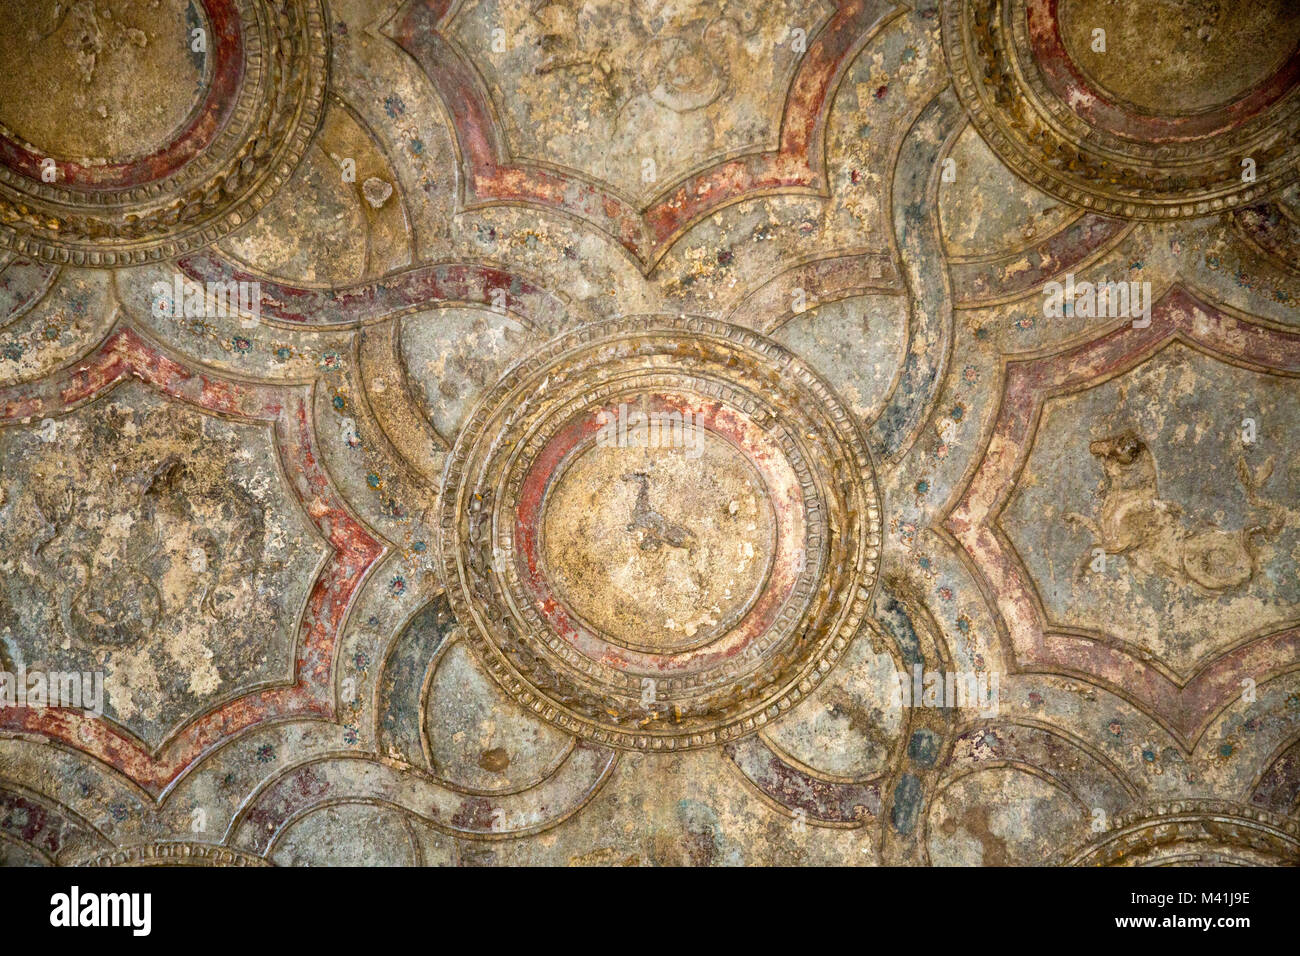 Excellent Example Of The Well Preserved Paintings On The